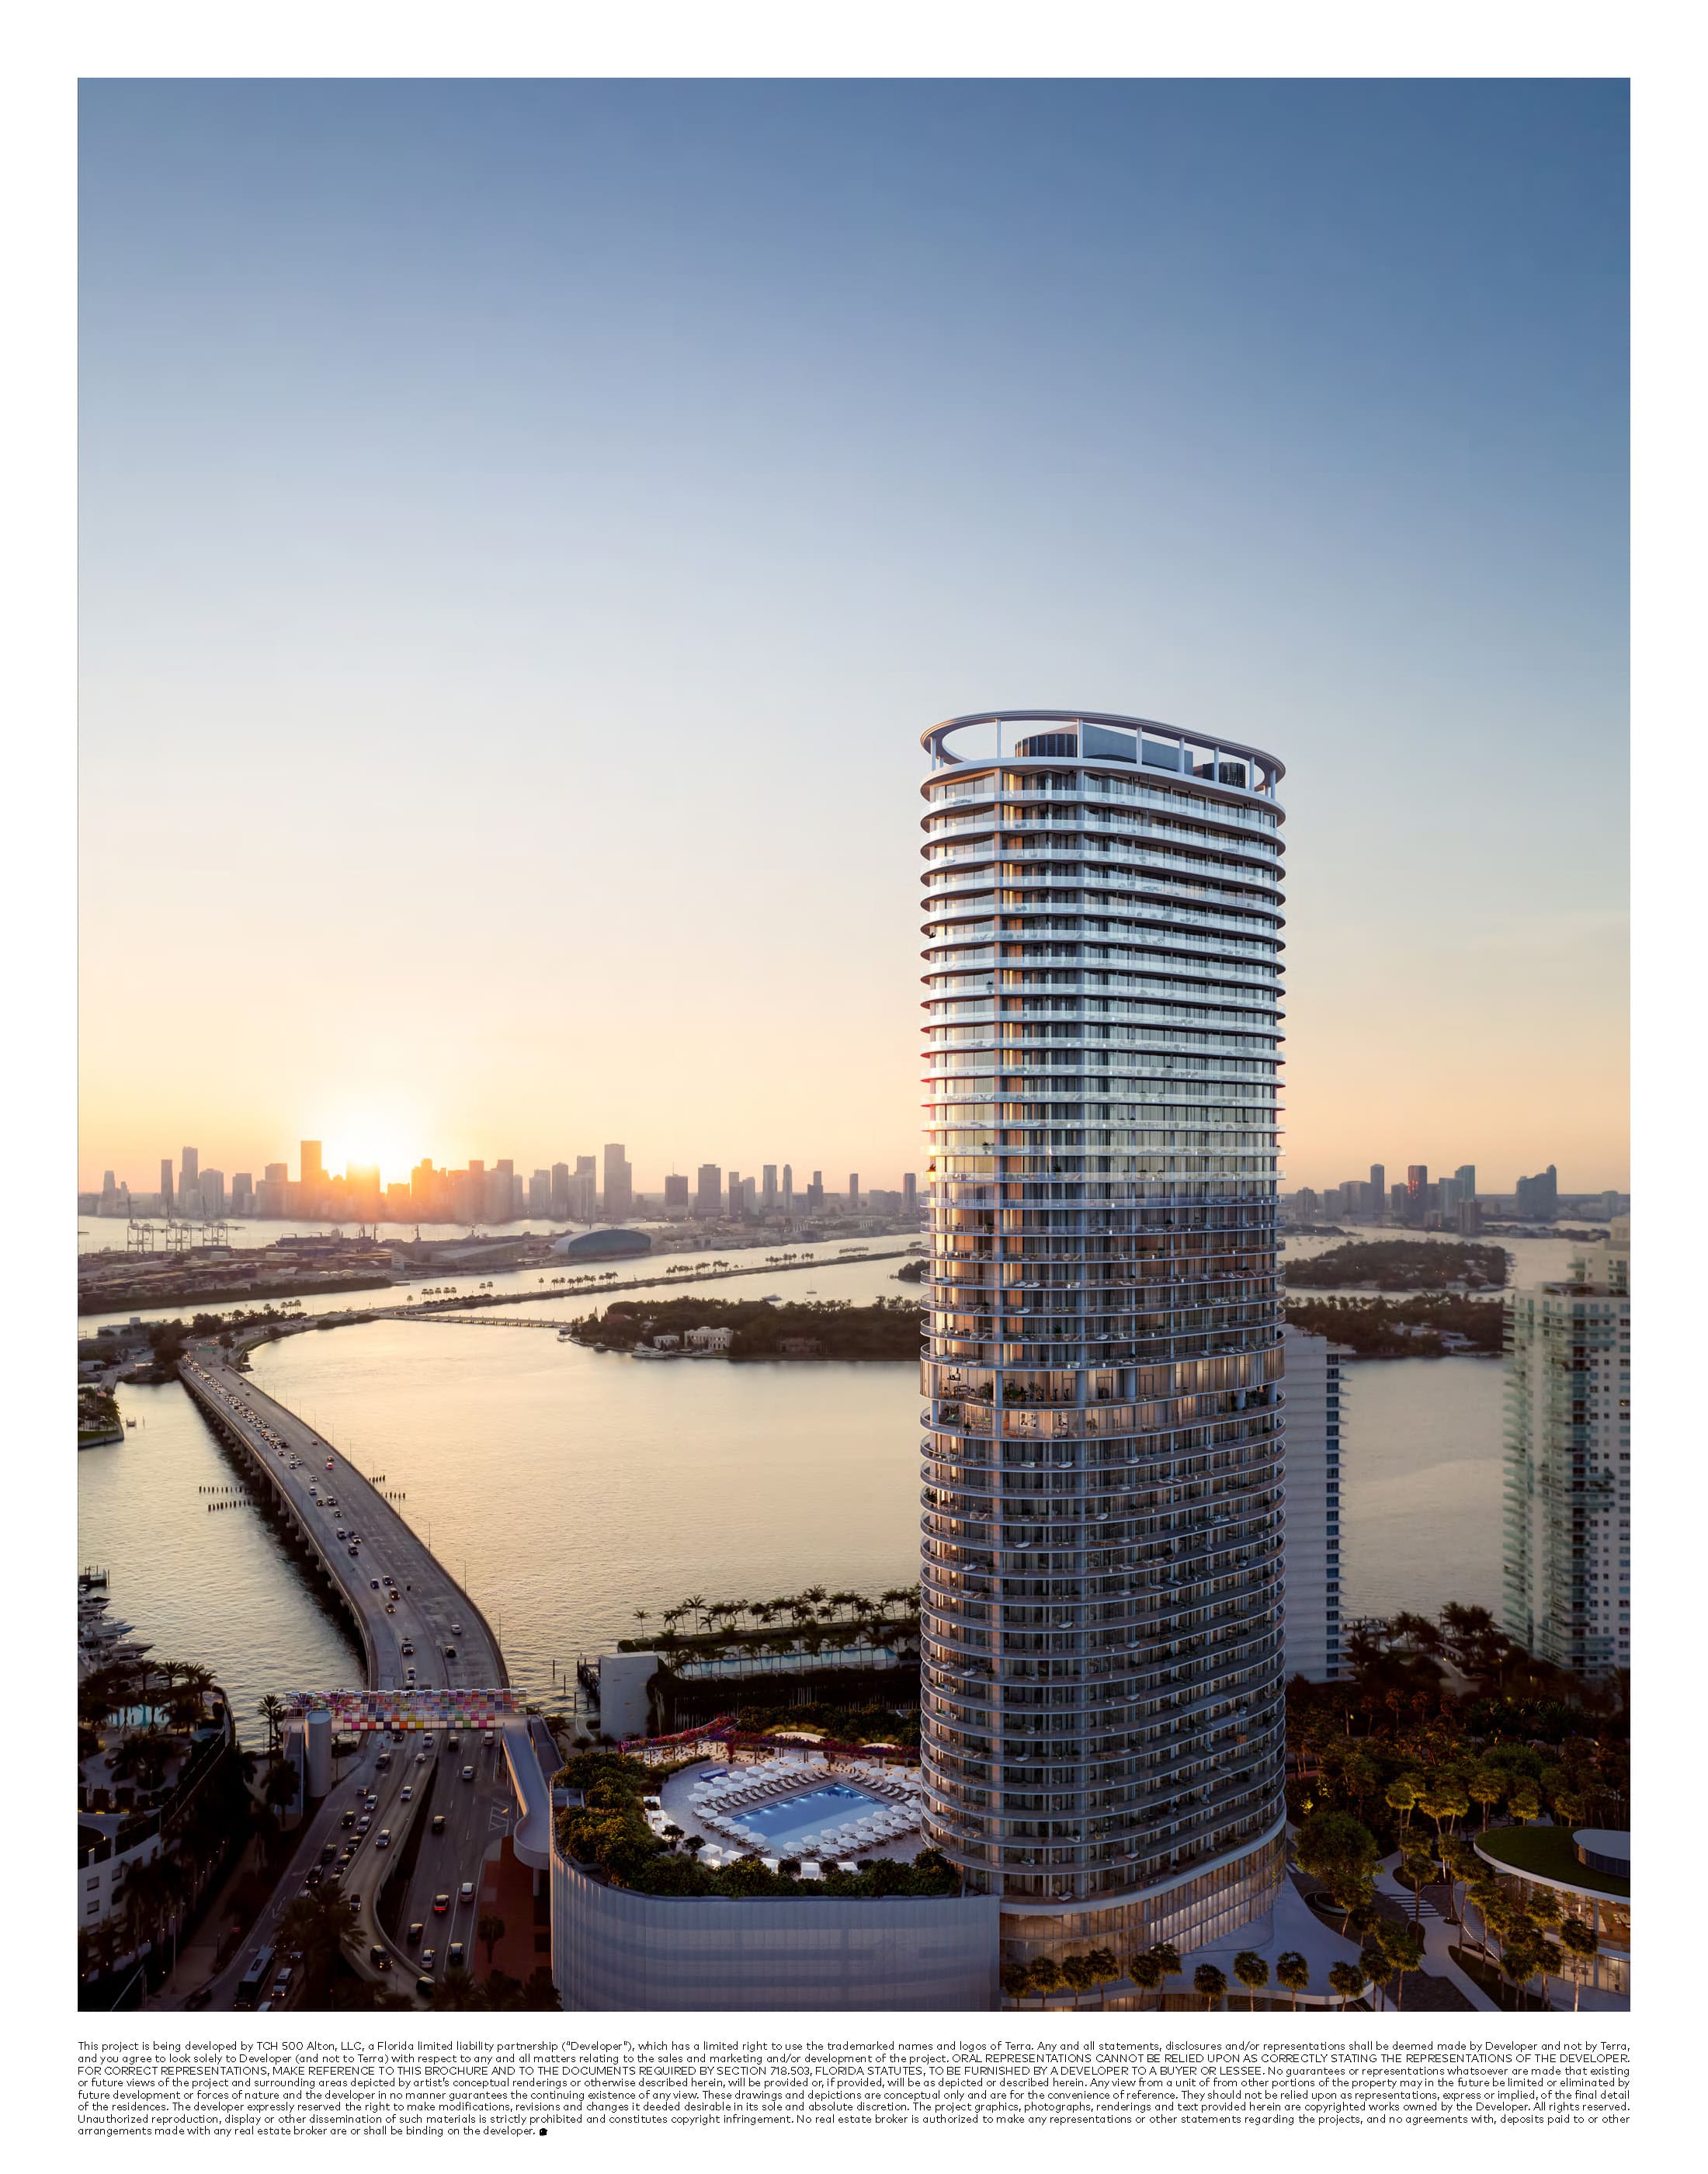 Five Park Miami Beach an unrivaled living experience